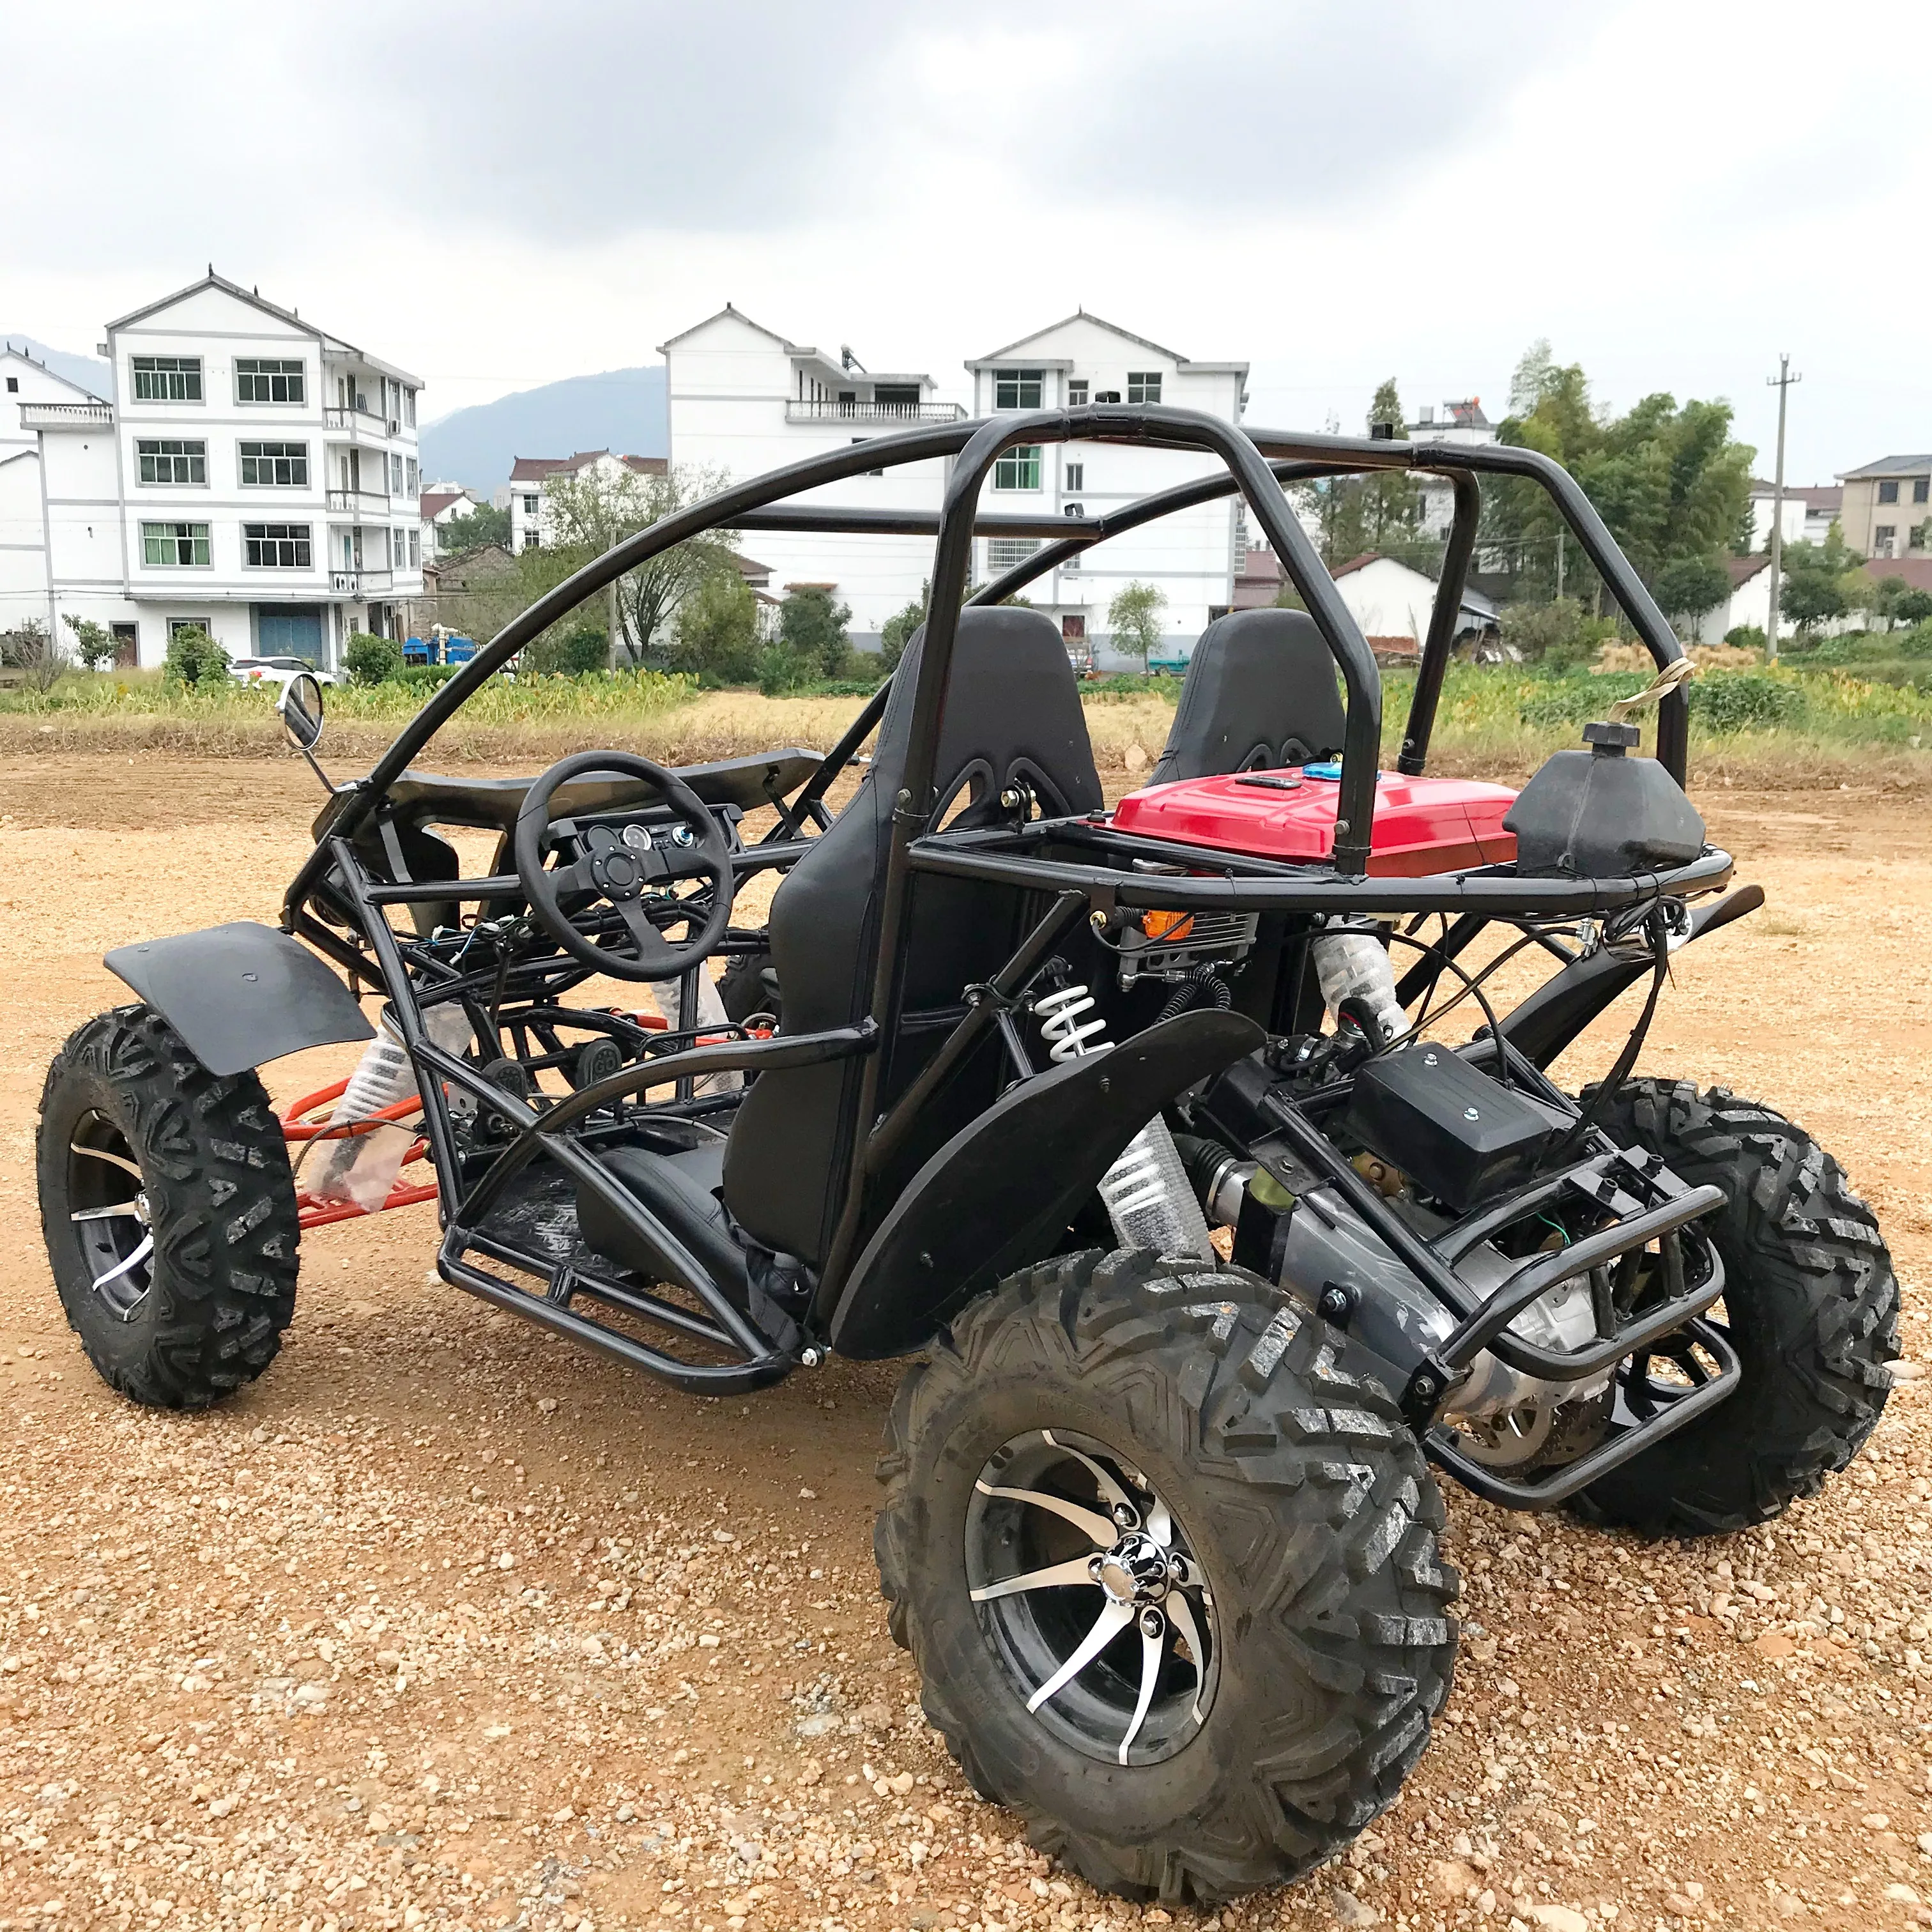 Tom Audreath Schatting Architectuur Lna Natural Built 200cc Usa Buggy - Buy Usa Buggy,Racing Buggy,Buggy Auto  Product on Alibaba.com